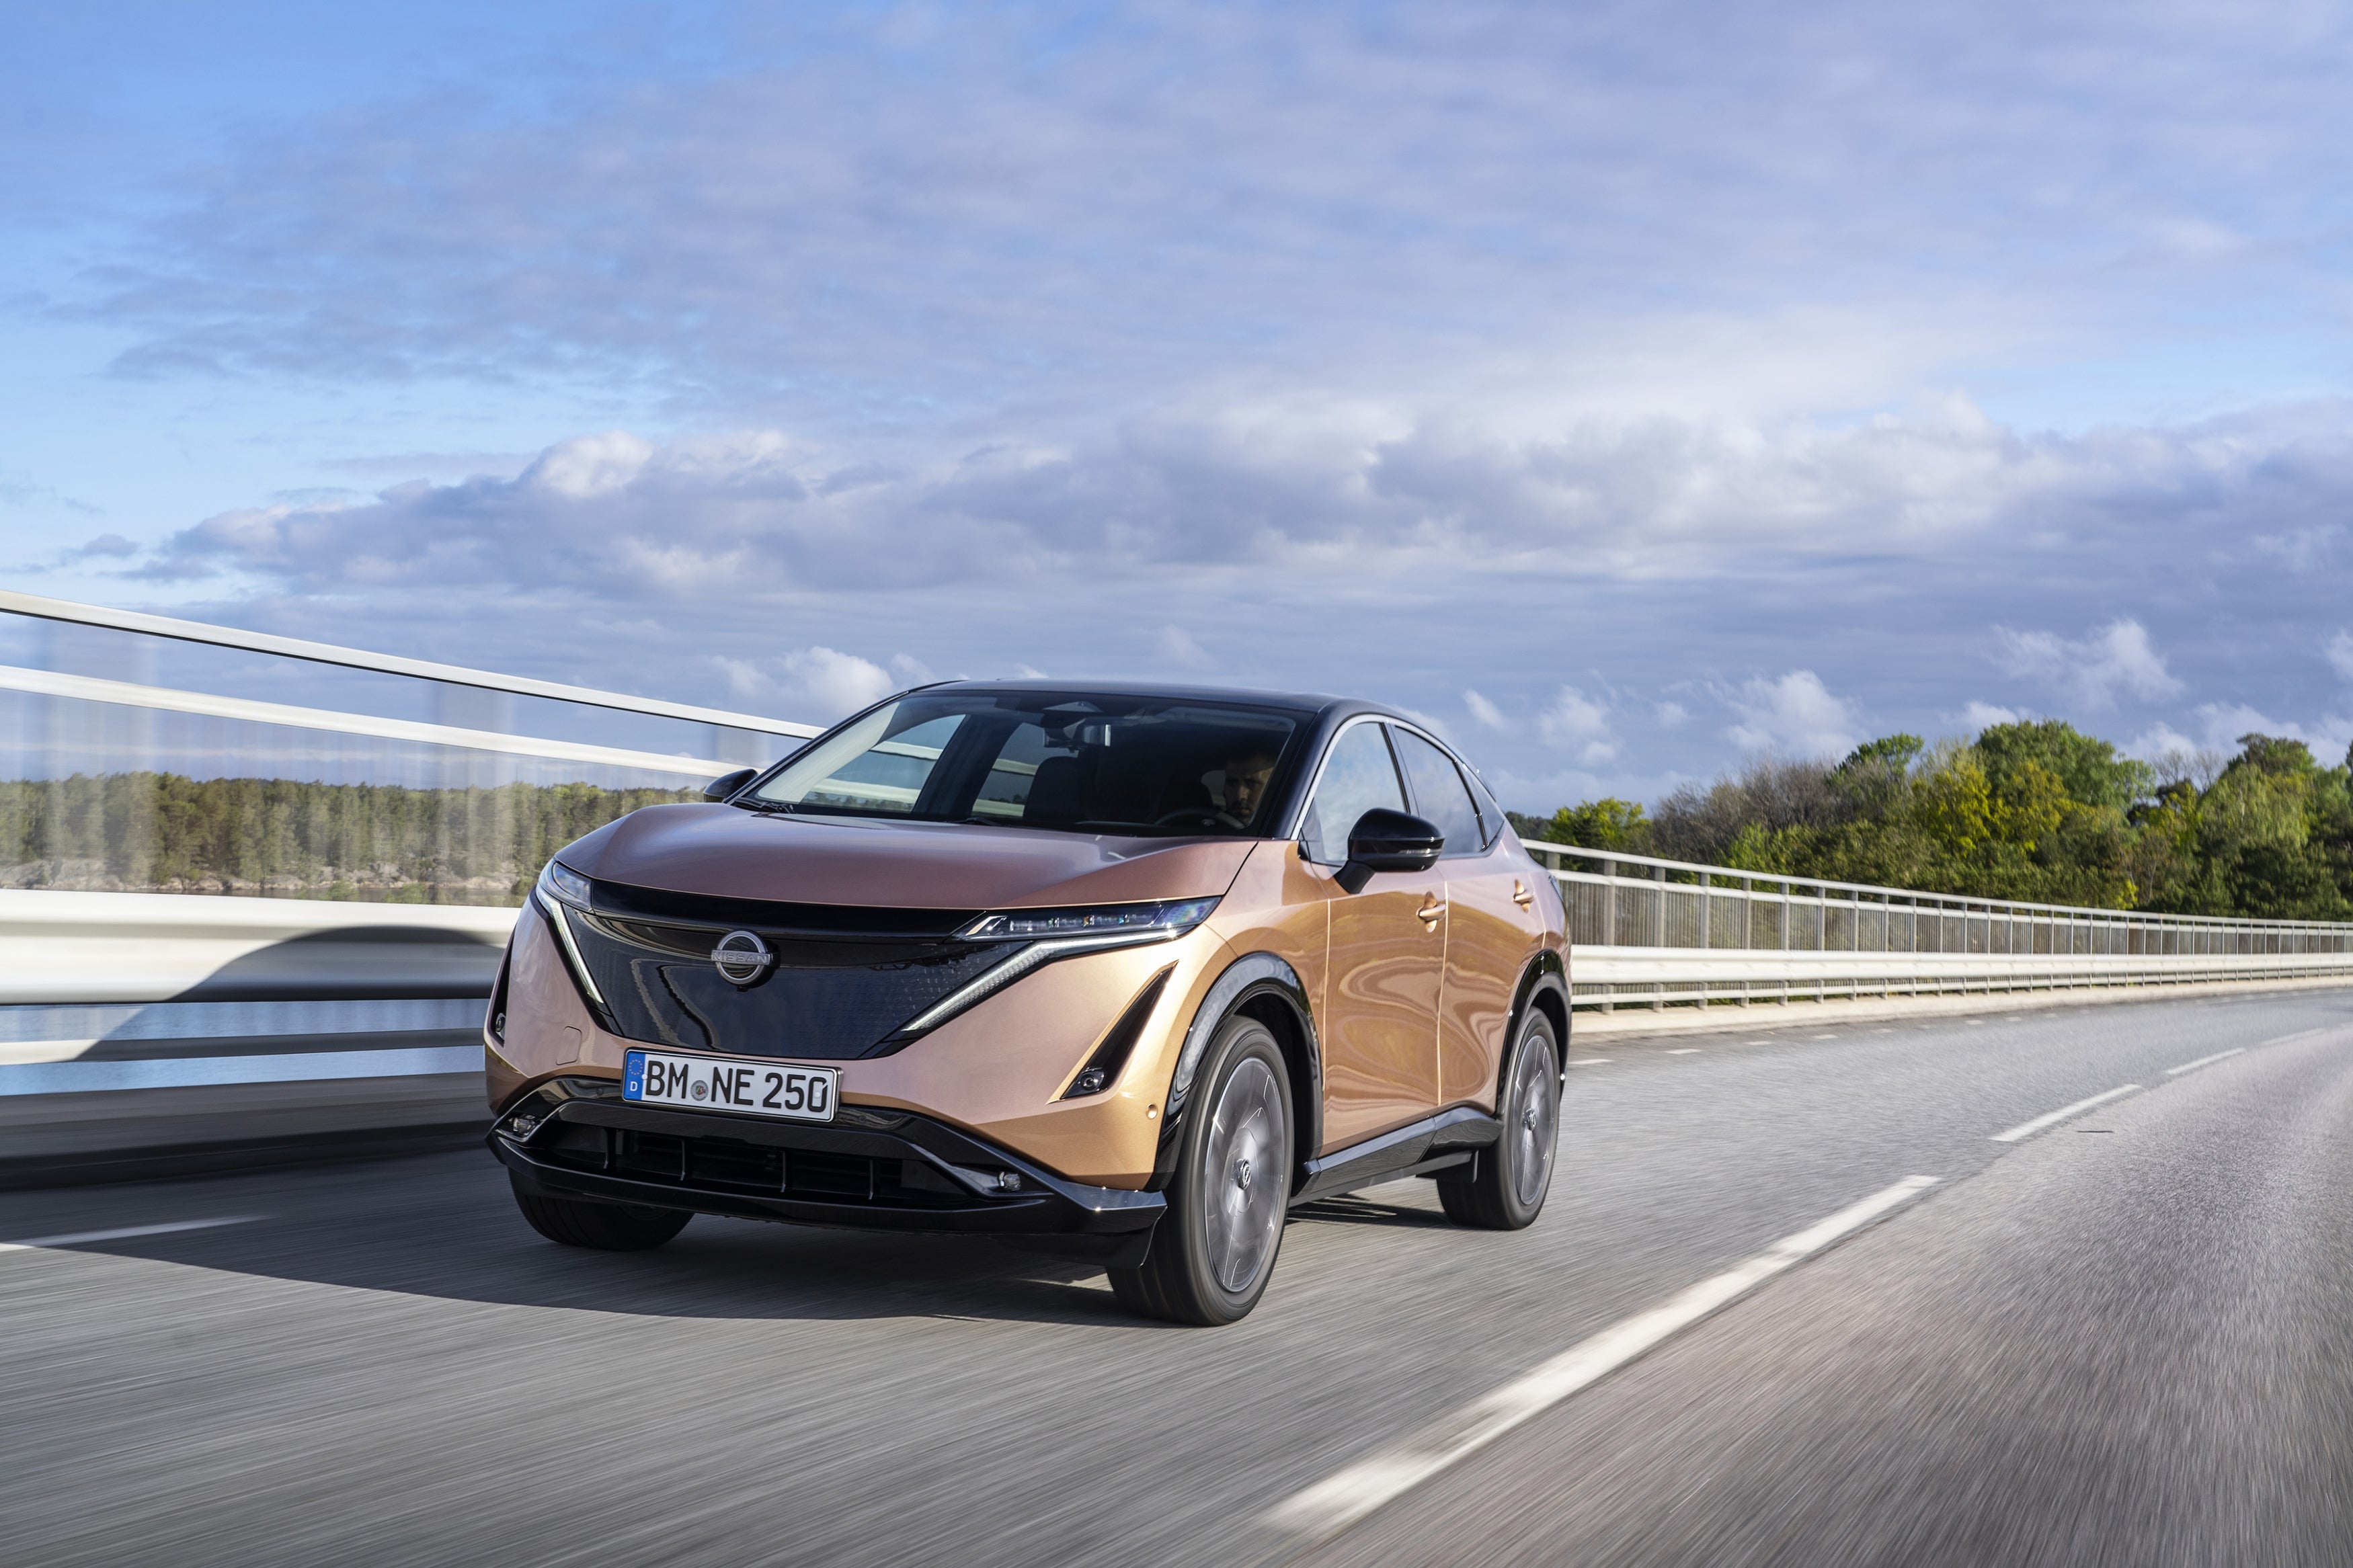 Every exterior surface of the new Nissan Ariya e-4ORCE has a sensual sort of curve to it, as if hand-carved